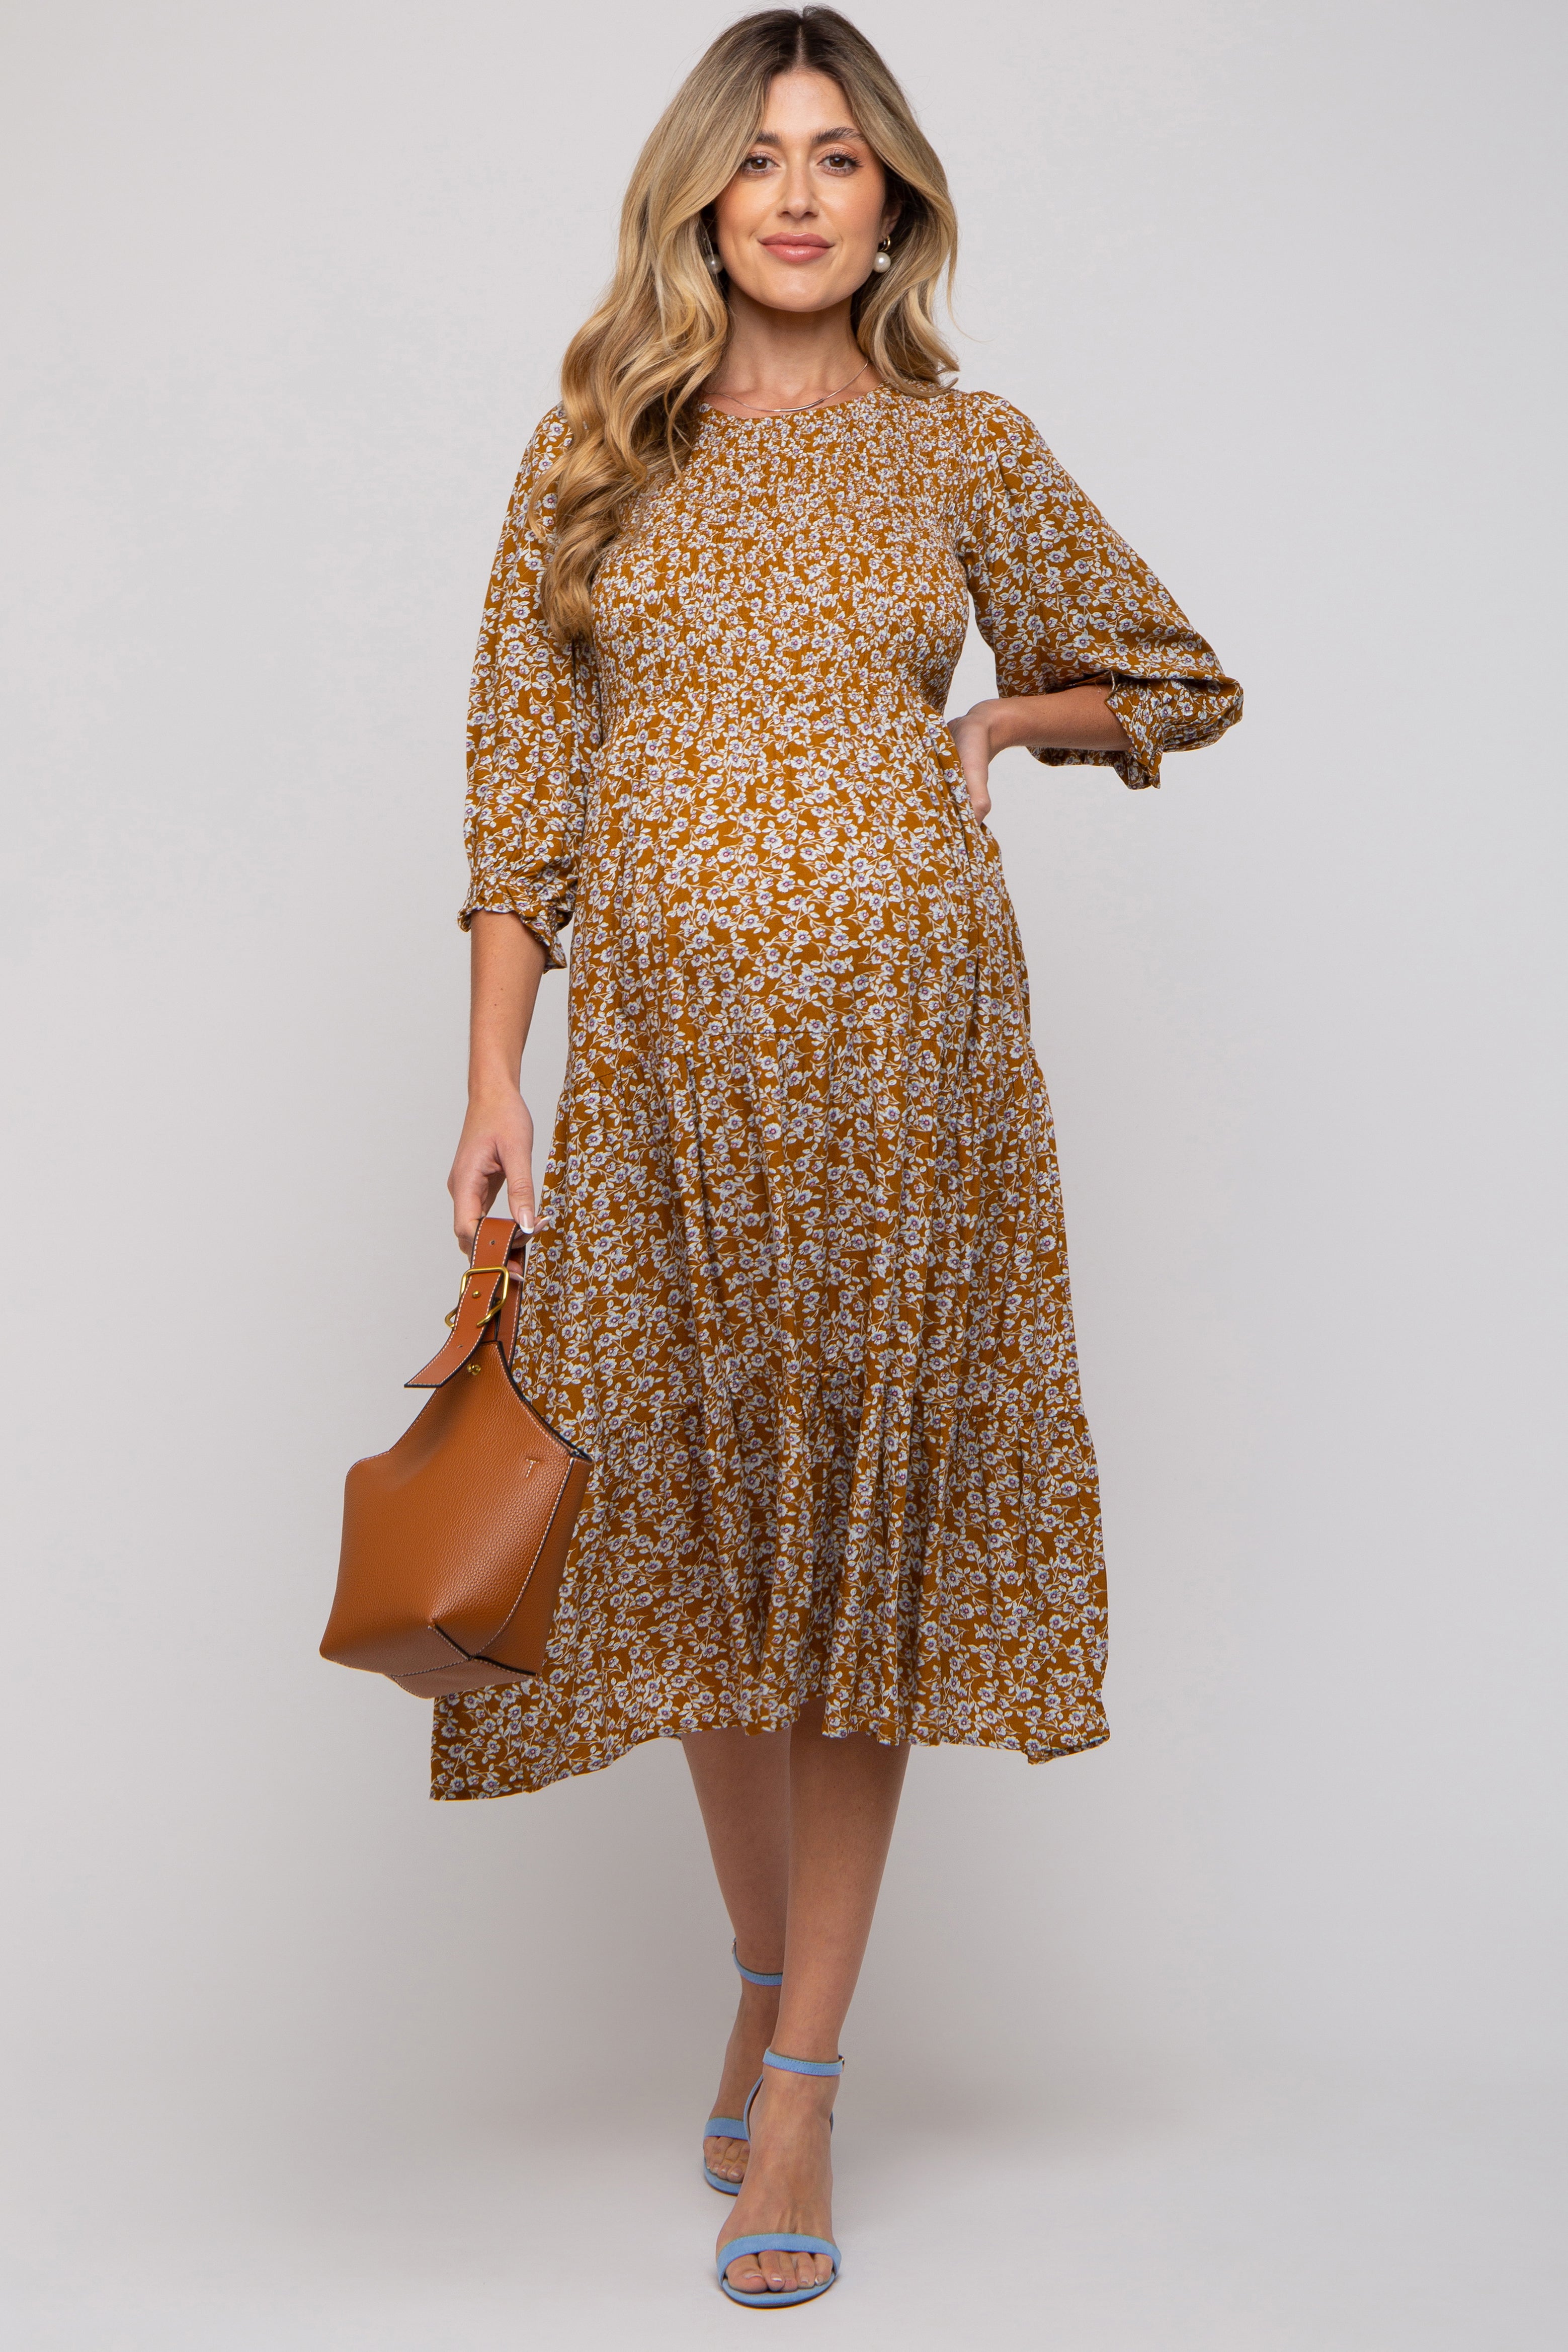 Topshop Maternity ribbed long sleeve tie waist Midi dress in Camel -  ShopStyle